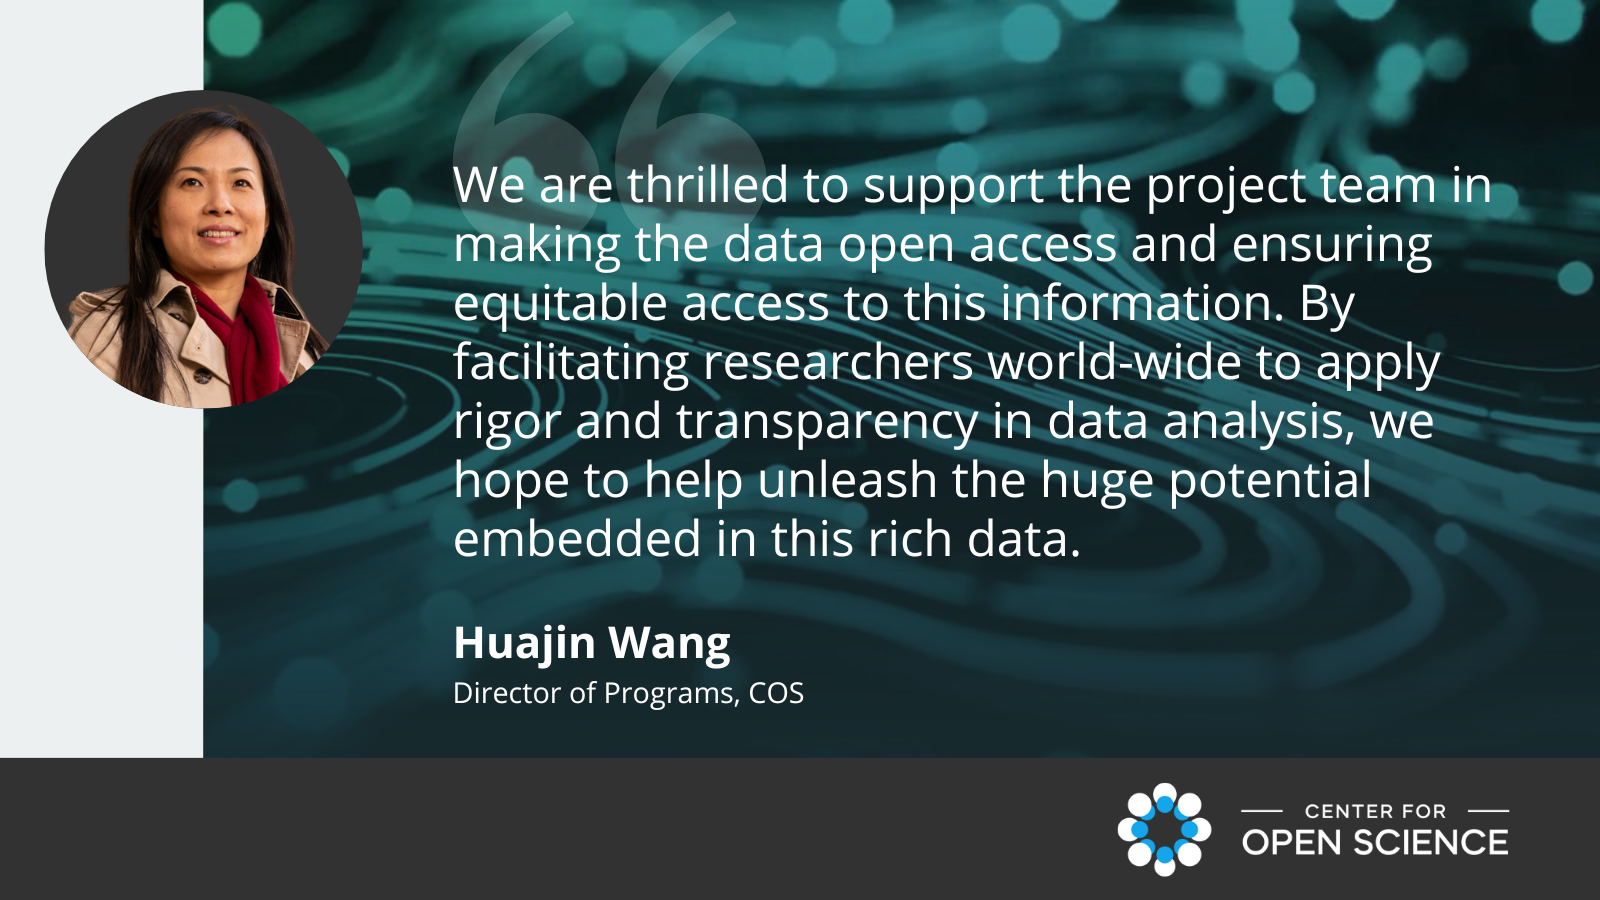 Image with quote form Huajin Wang: We are thrilled to support the project team in making the data open access and ensuring equitable access to this information. By facilitating researchers world-wide to apply rigor and transparency in data analysis, we hope to help unleash the huge potential embedded in this rich data.